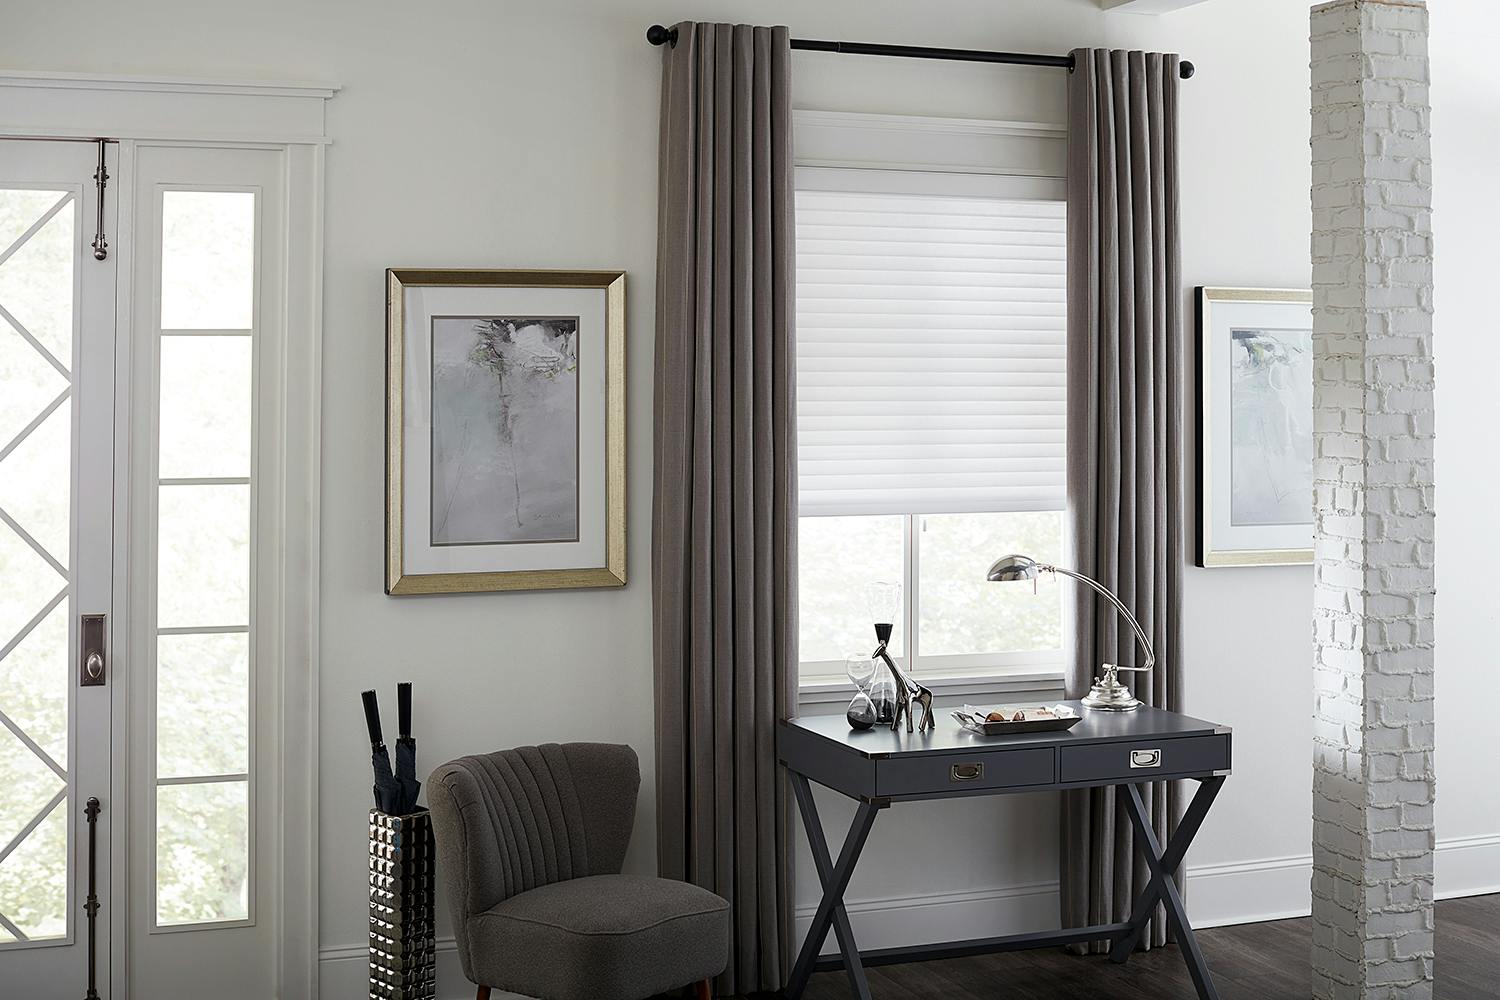 Types of Curtains to Know for Picking Window Treatments